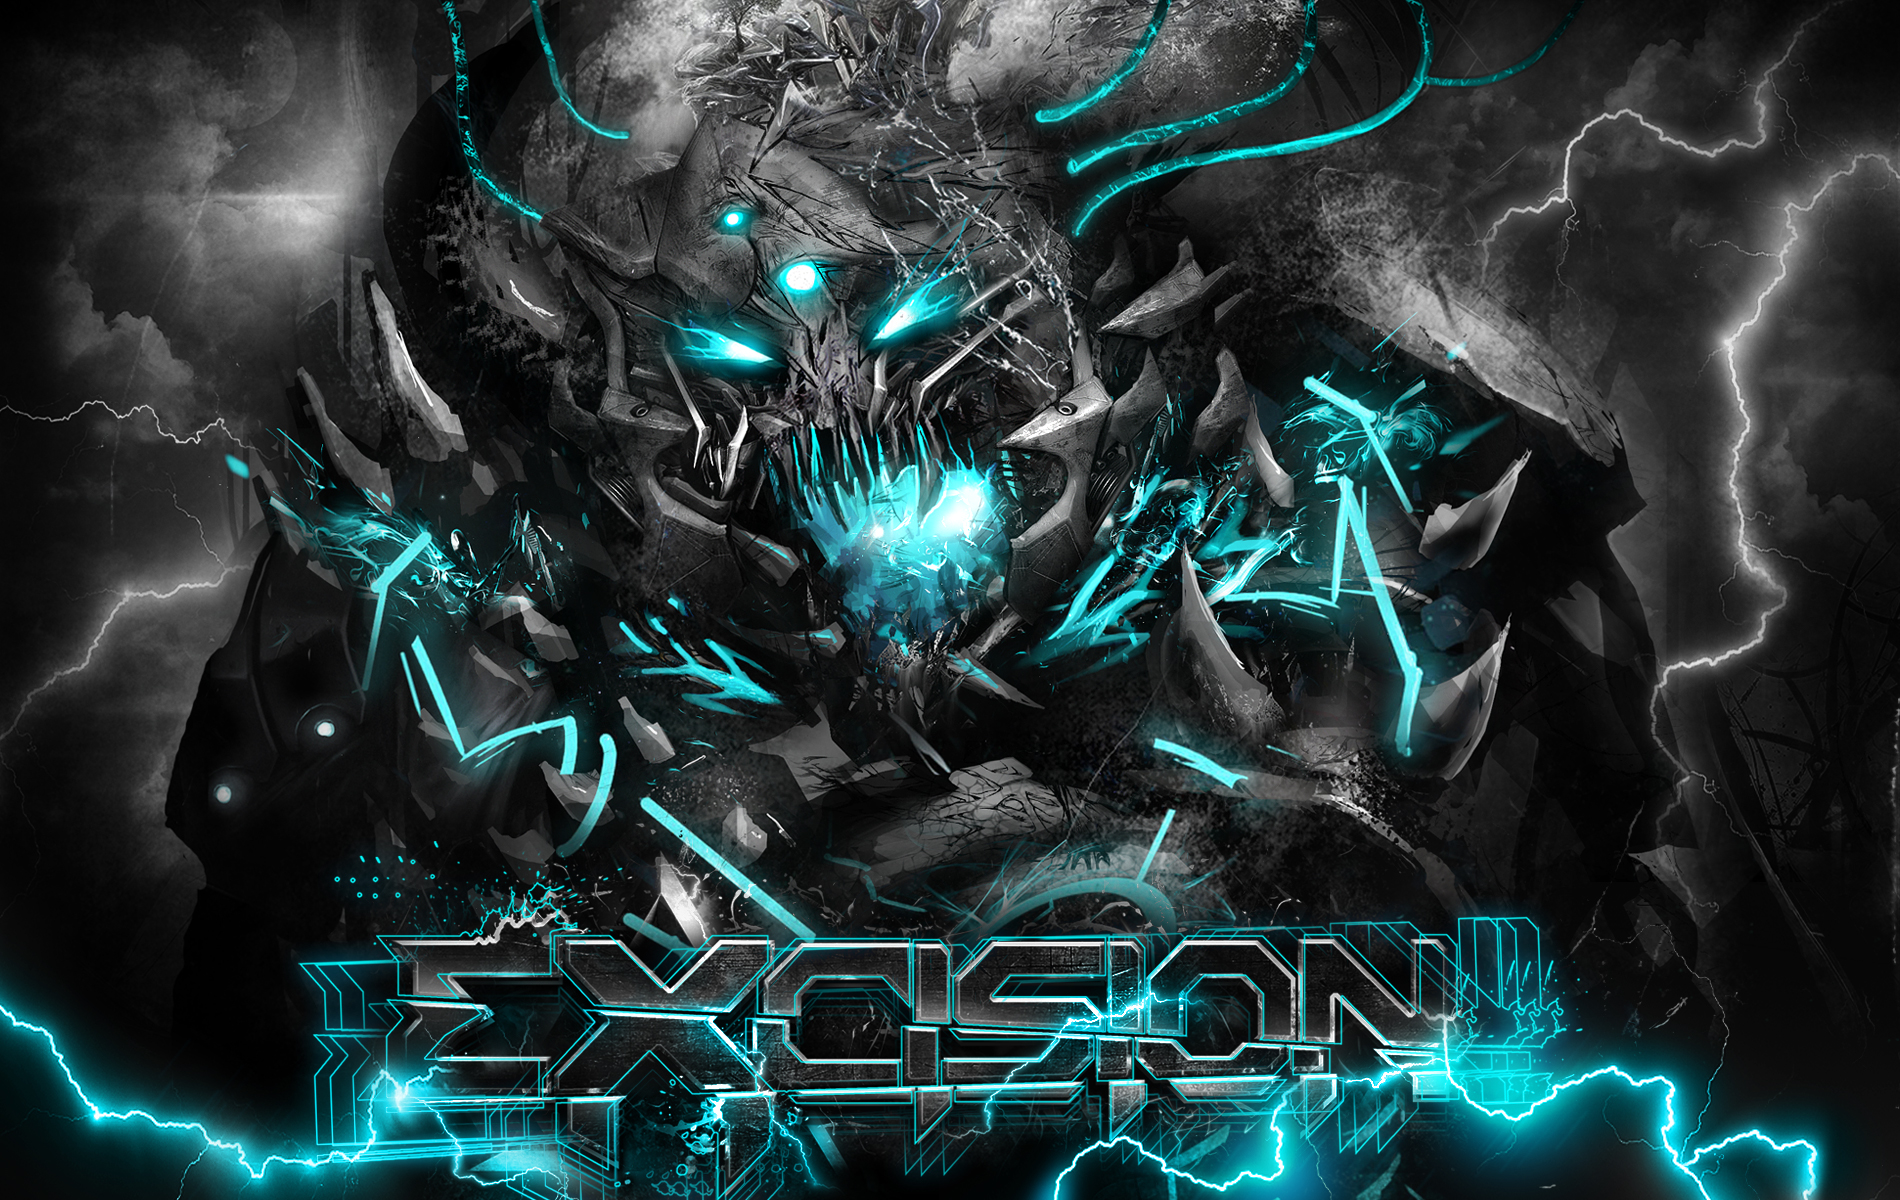 Excision #5